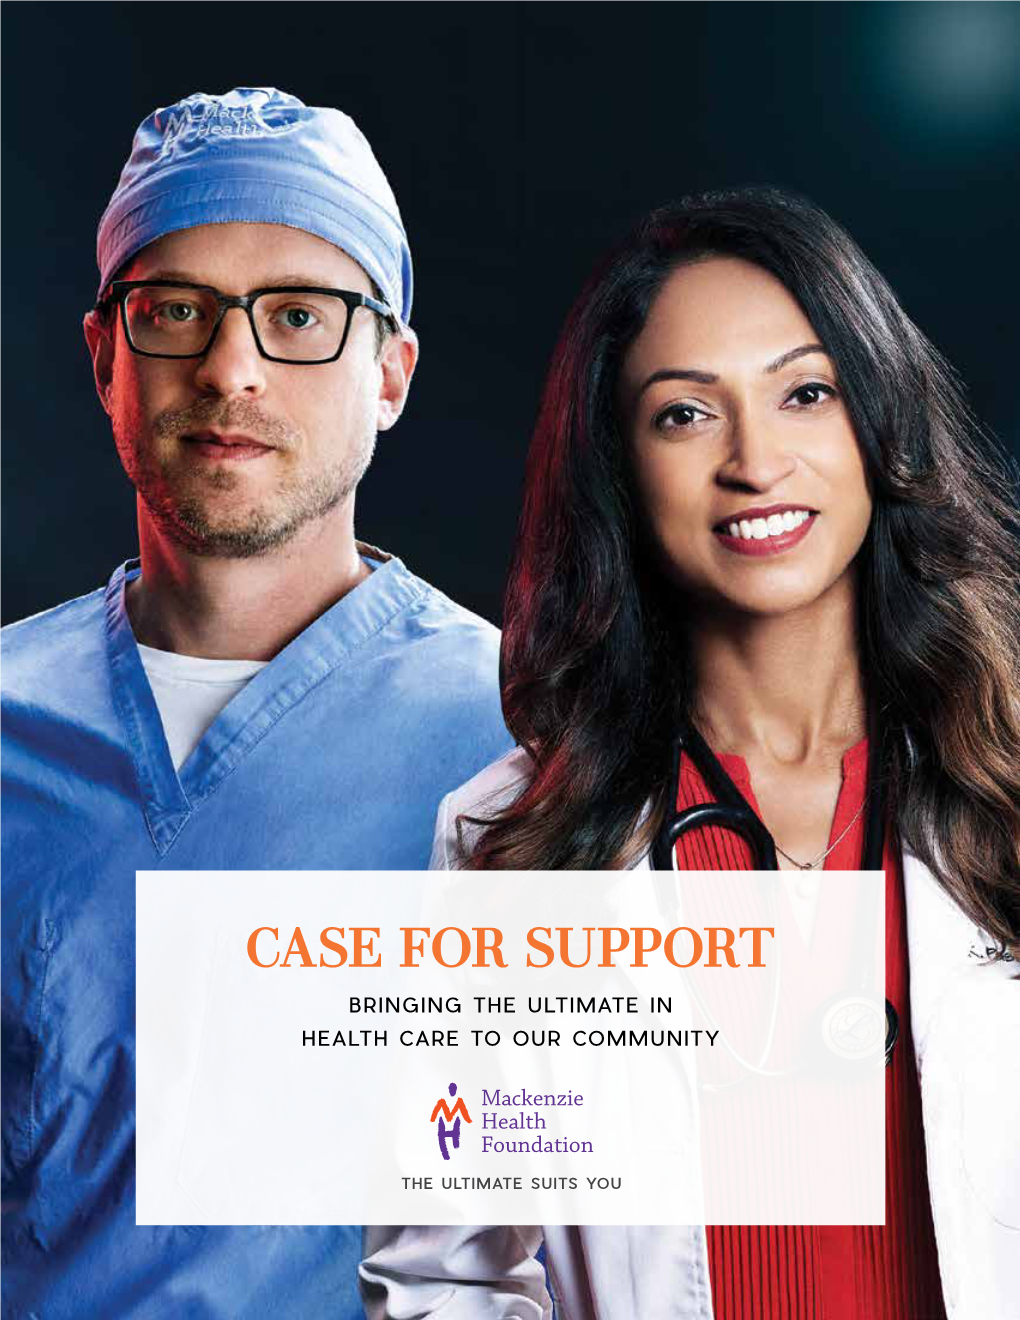 Case for Support Bringing the Ultimate in Health Care to Our Community Exceptional Together Shaping the Ultimate in Health Care for the Future